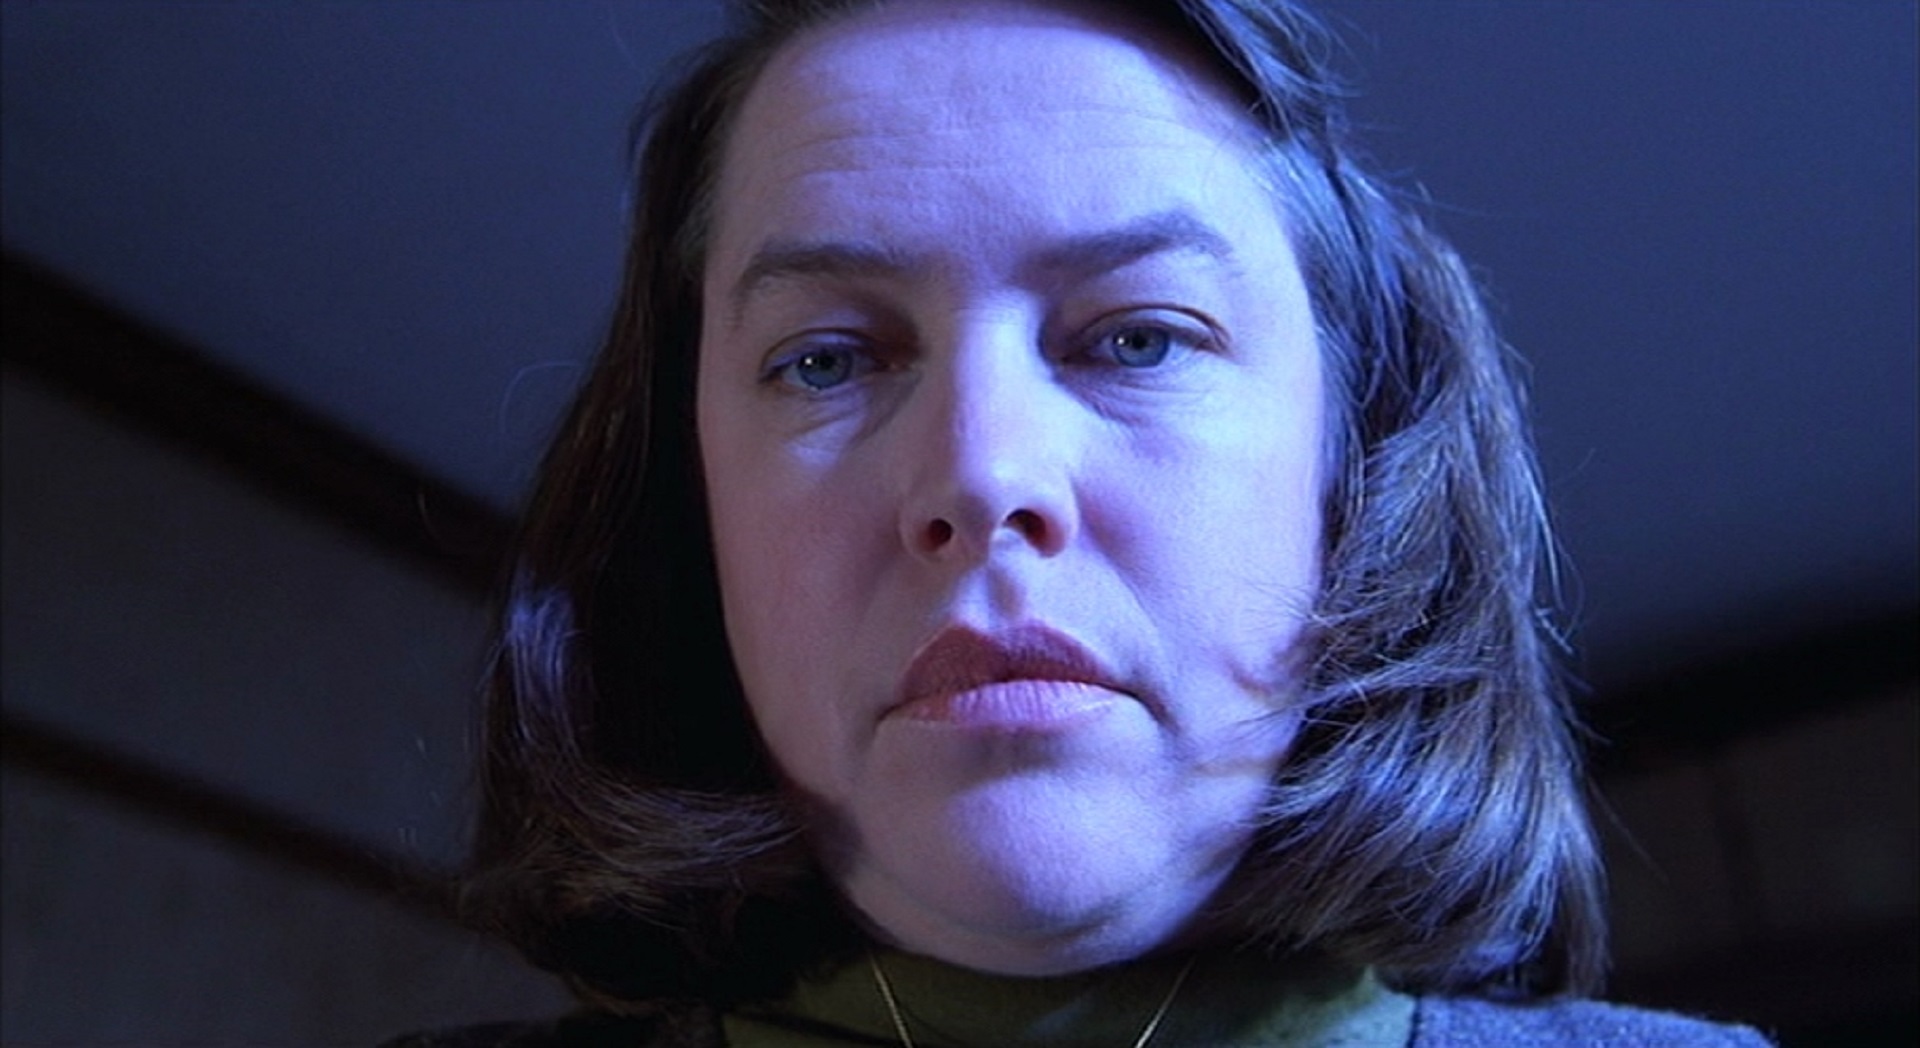 Kathy Bates in Misery; Copyright: Columbia Pictures / MGM Home Entertainment